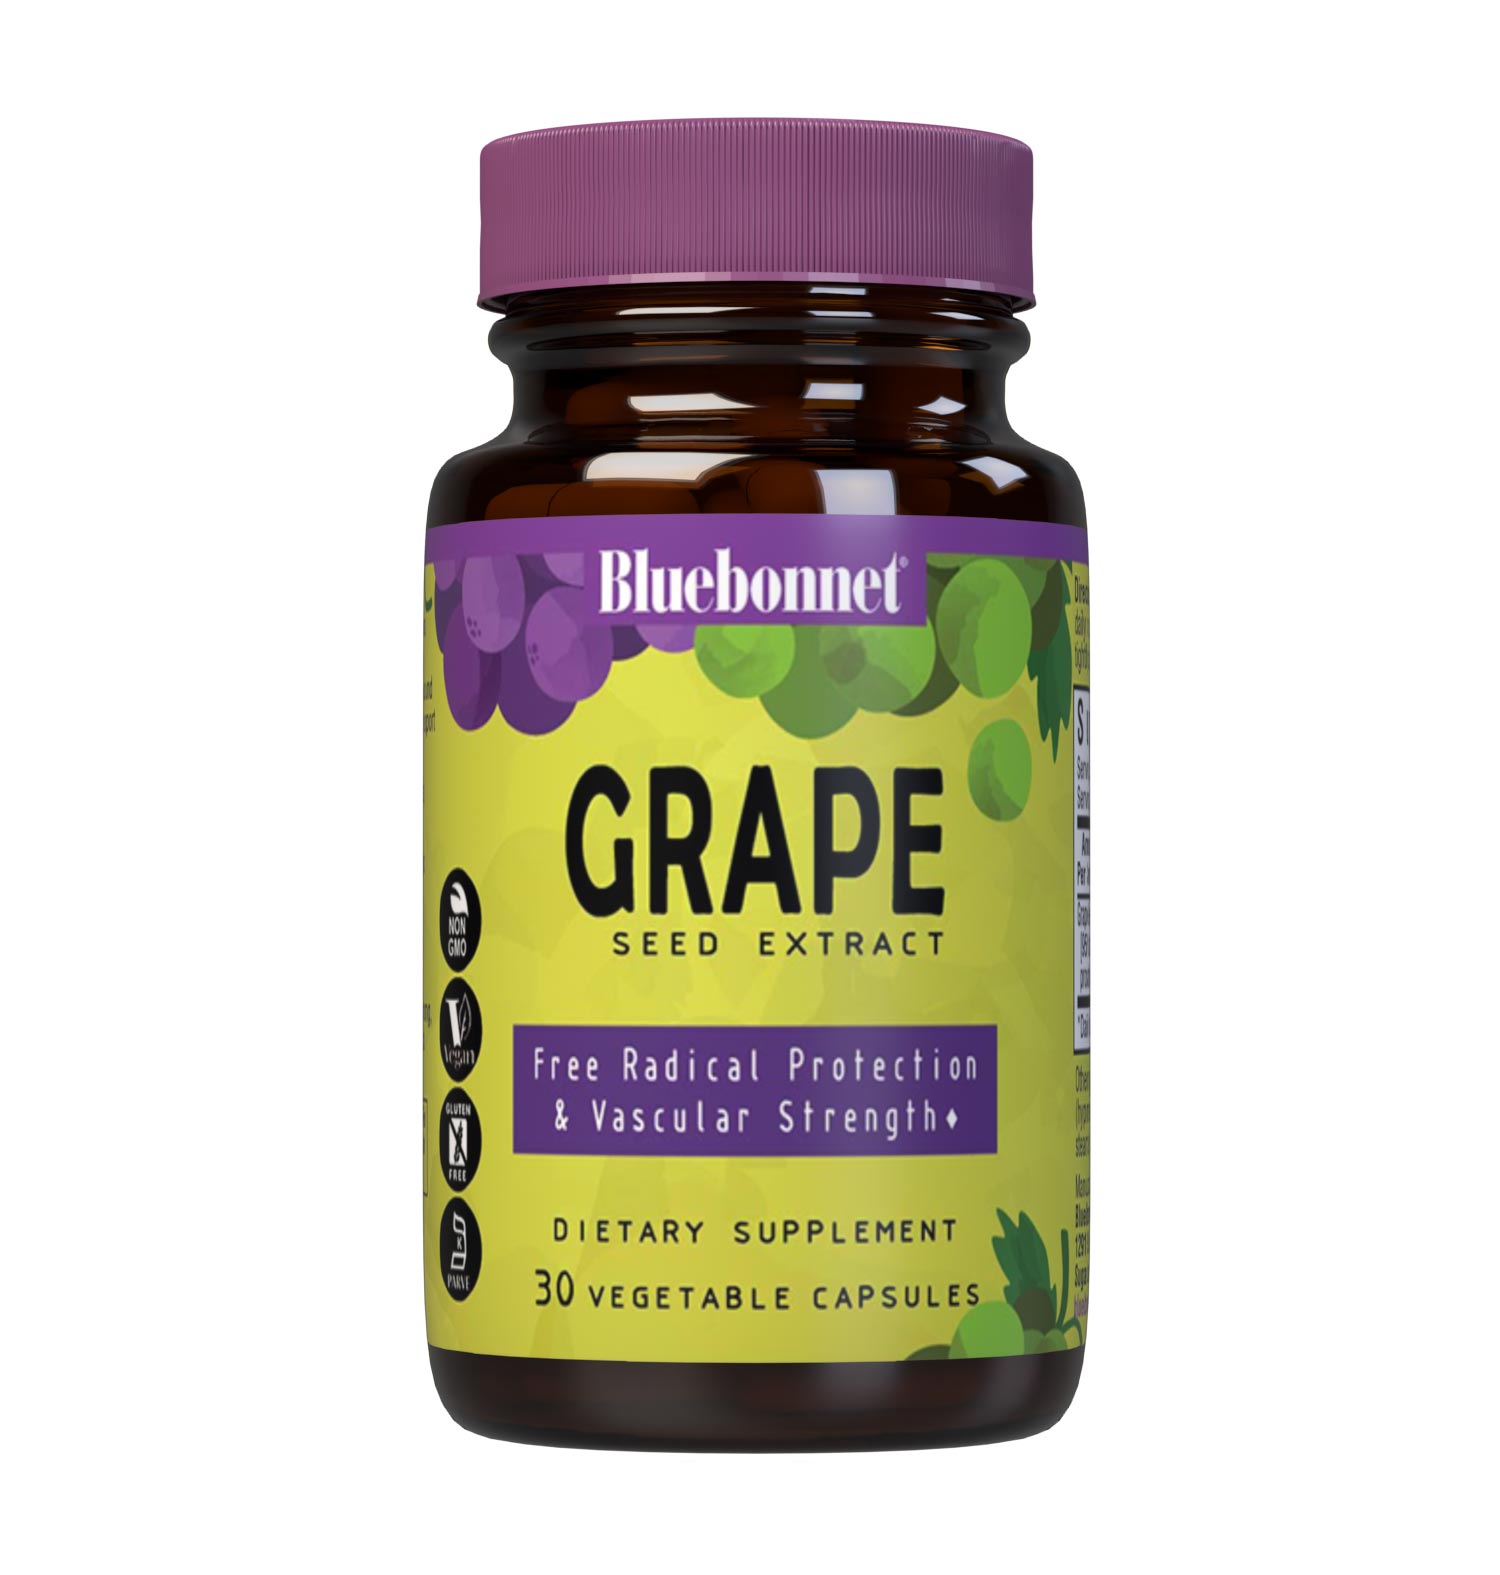 Bluebonnet’s Super Fruit Grape Seed Extract 30 Vegetable Capsules are derived from Champagne grape seeds imported from France. These special grape seeds are turned into an extract known as Leucoselect supplying 100 mg per serving of grape seed extract standardized to 95% total polyphenols including oligomeric proanthocyanidins, monomeric polyphenols and flavonoids. These potent active constituents help support circulatory health and protect against the damaging effects of free radicals. #size_30 count